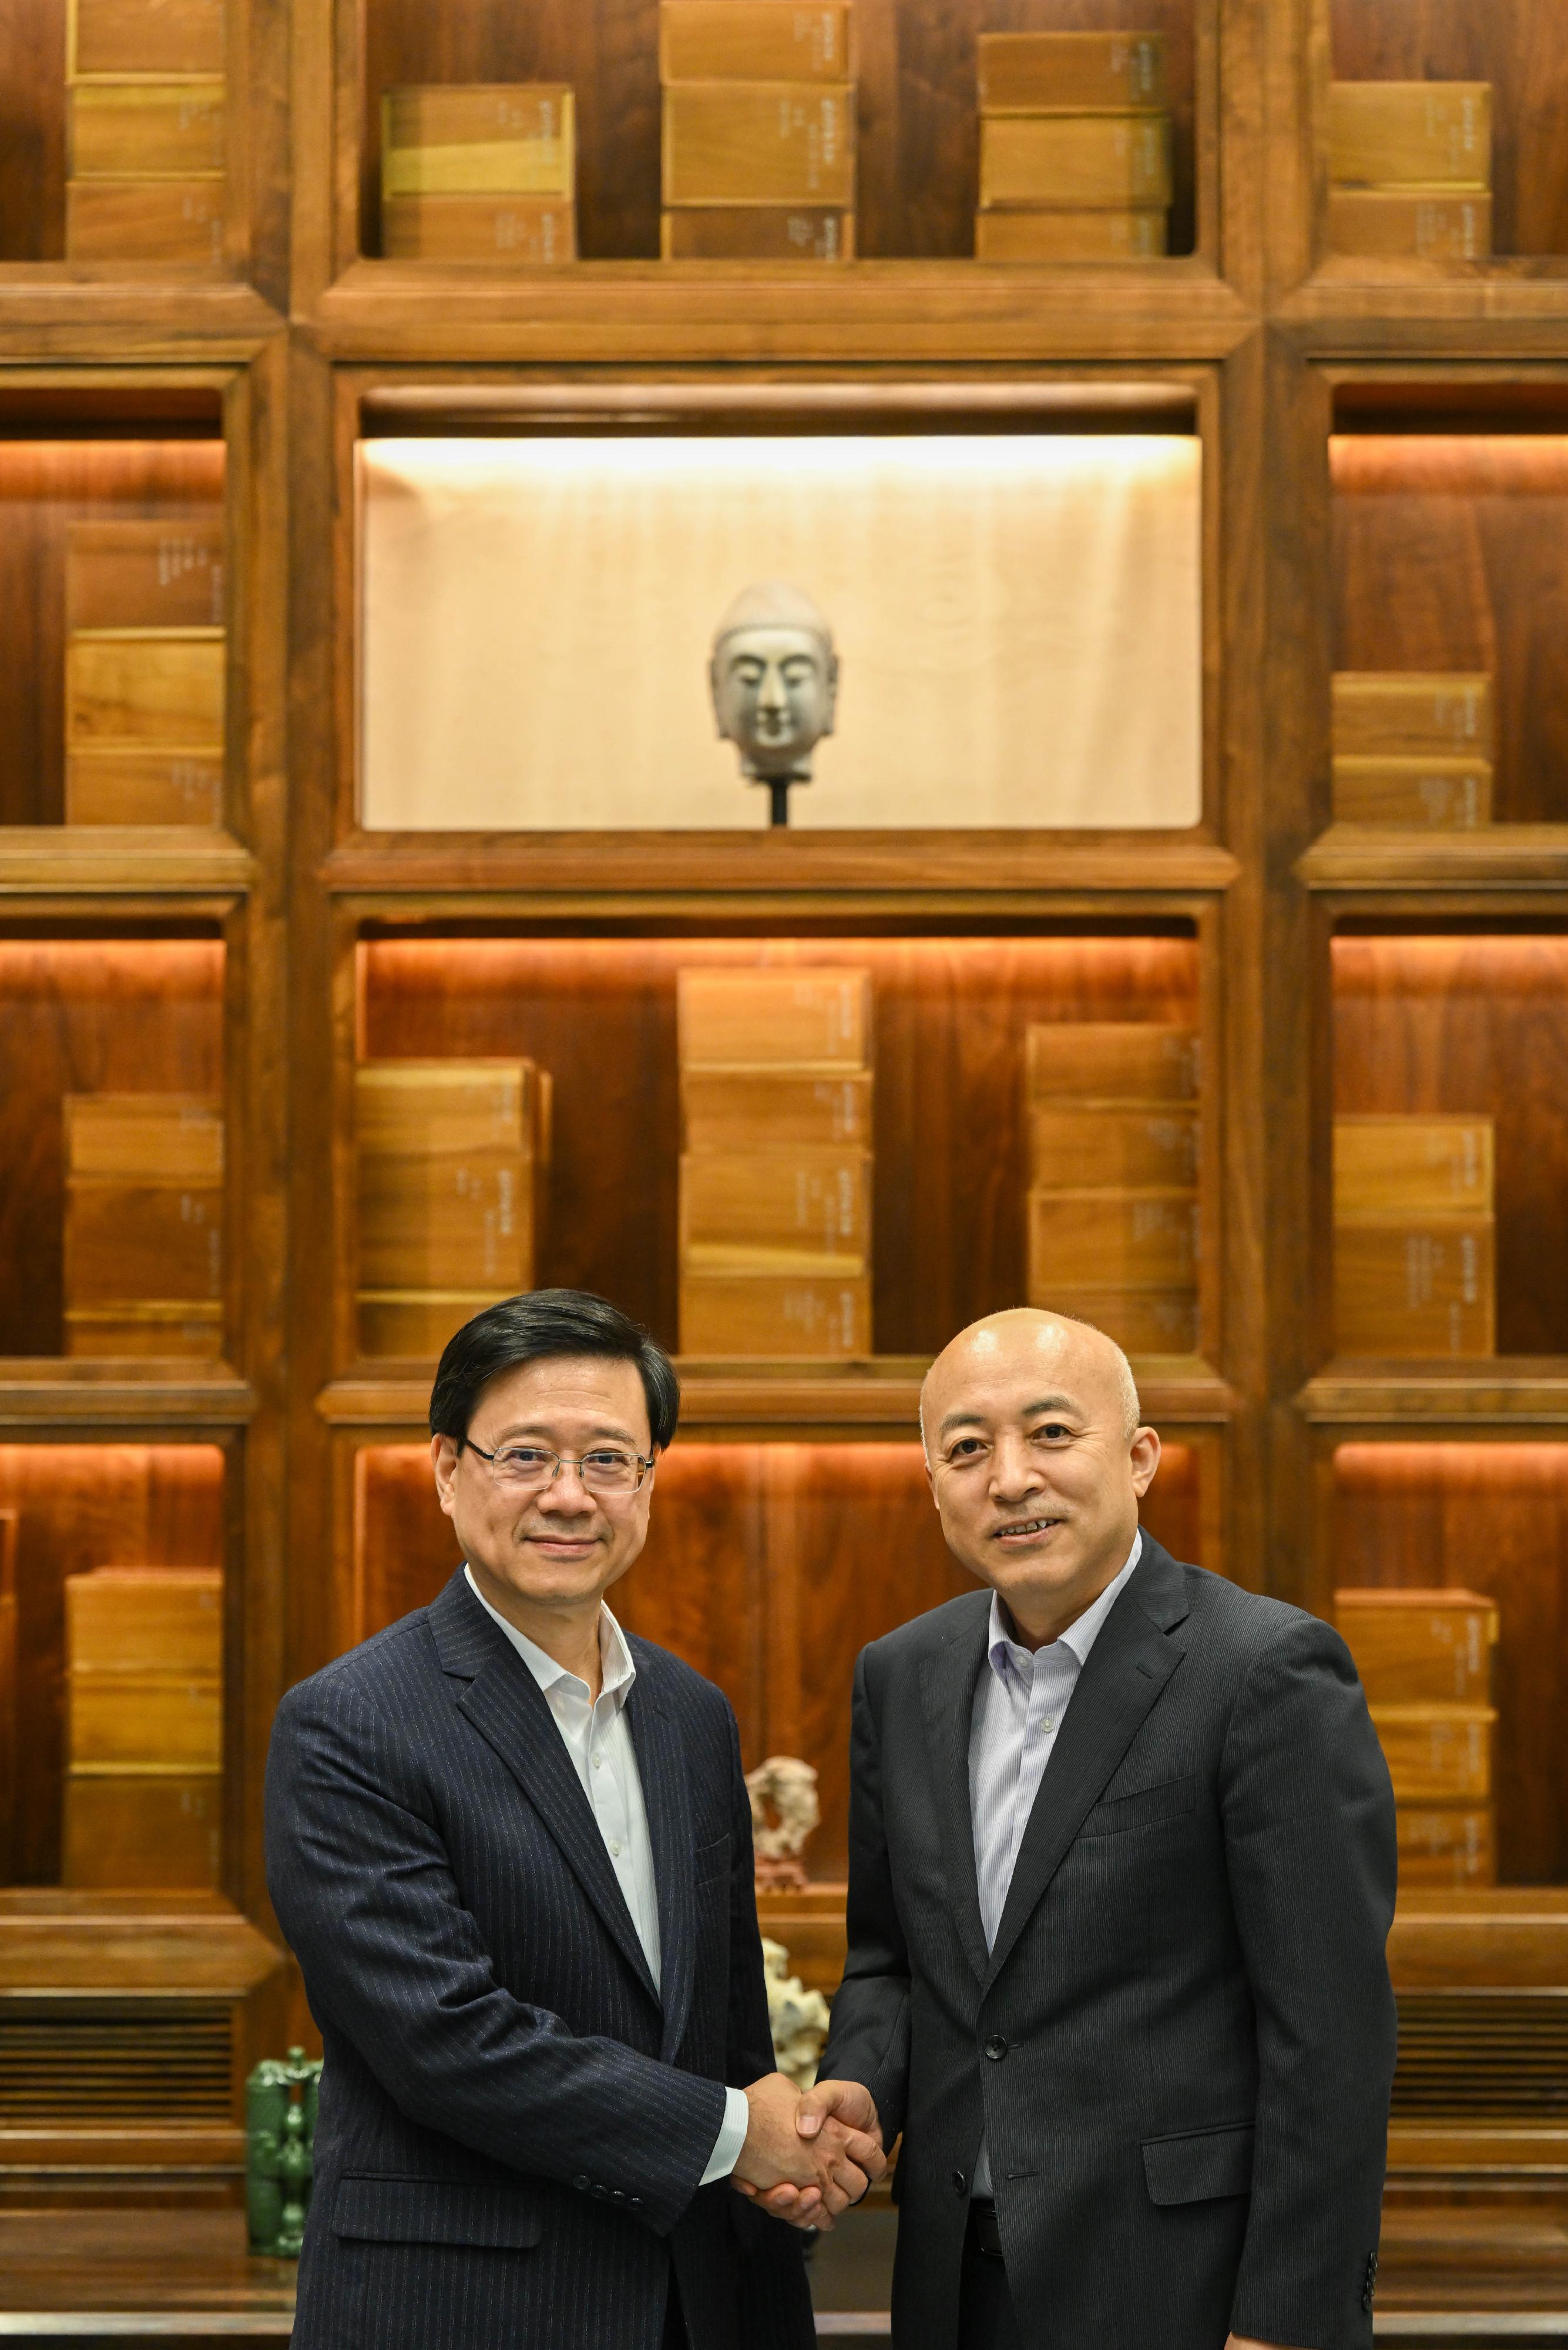 The Chief Executive, Mr John Lee, visited the Palace Museum  in Beijing this afternoon (March 14). Photo shows Mr Lee (left) meeting with the Director of the Palace Museum, Dr Wang Xudong (right).